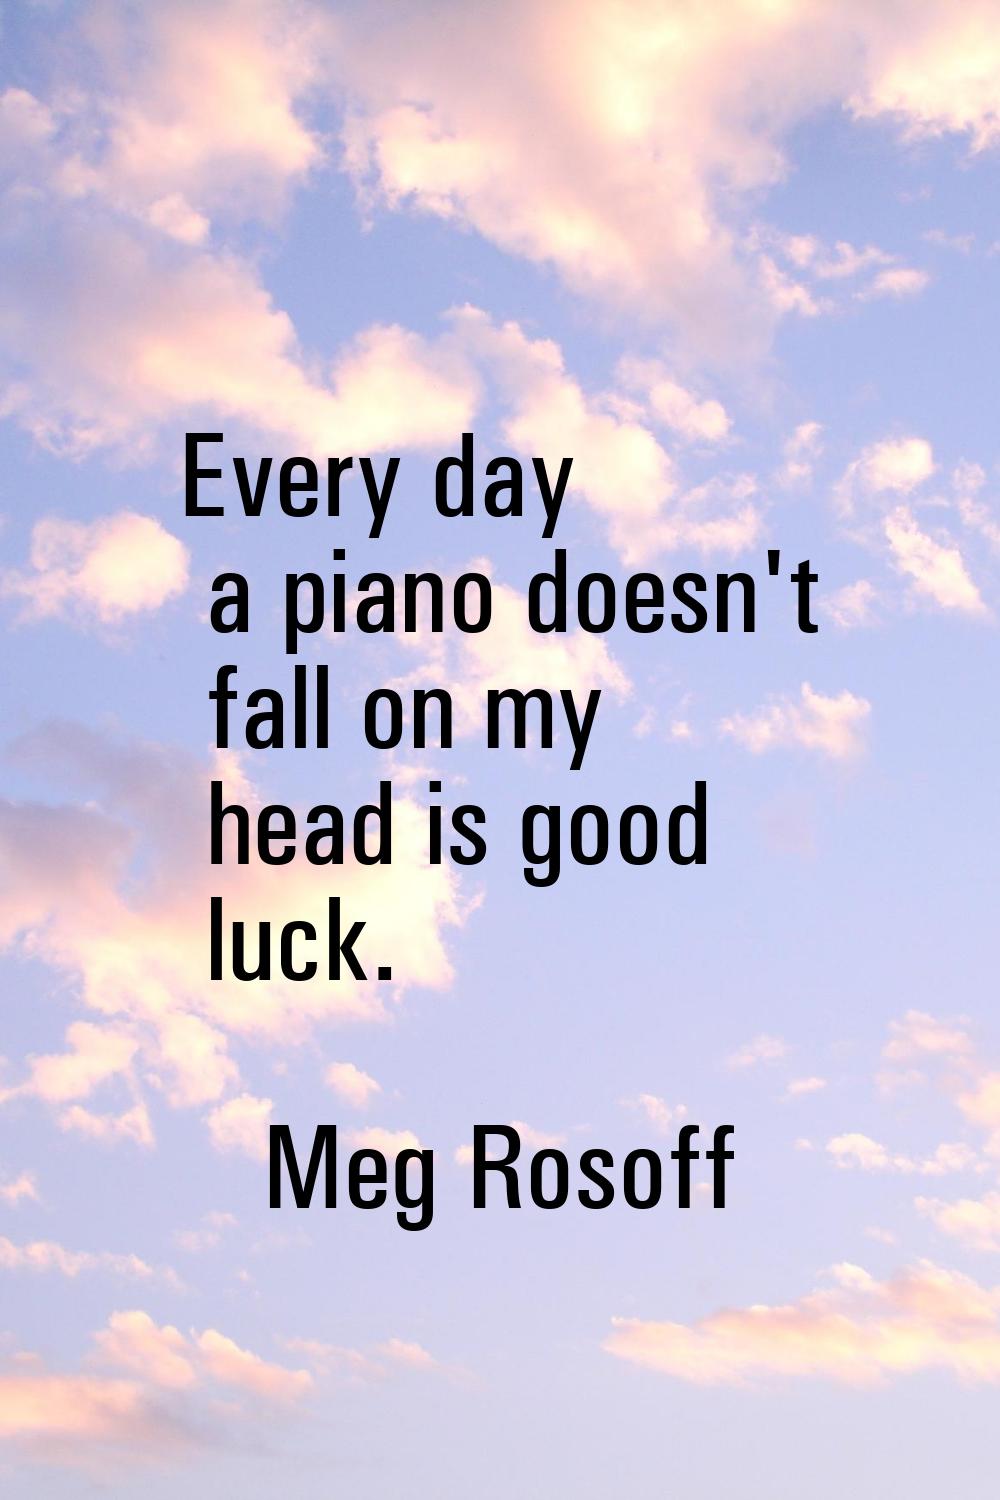 Every day a piano doesn't fall on my head is good luck.